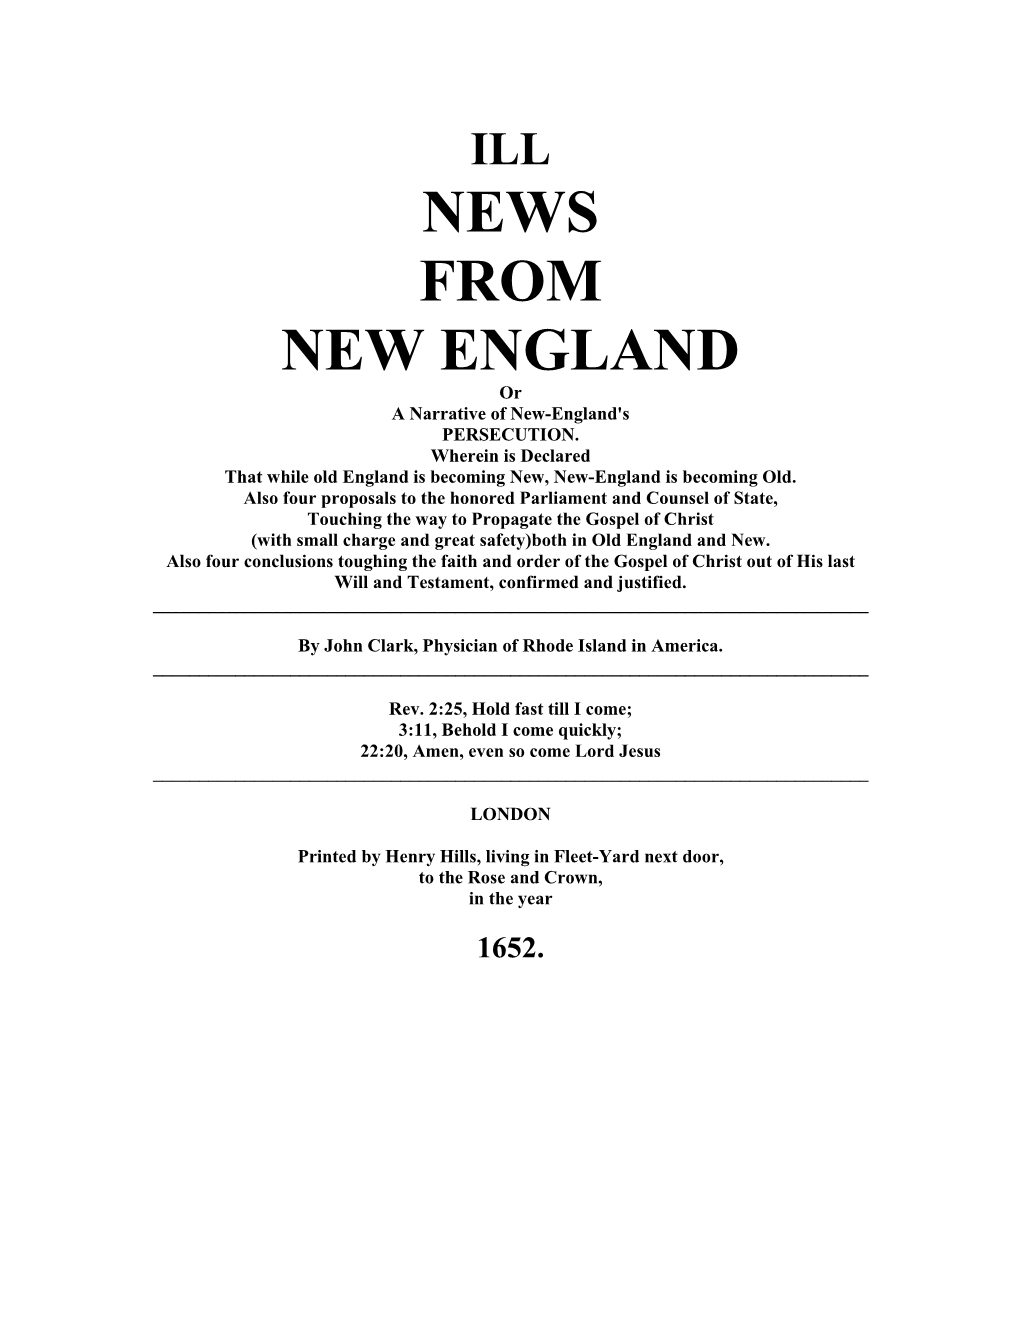 ILL NEWS from NEW ENGLAND Or a Narrative of New-England's PERSECUTION